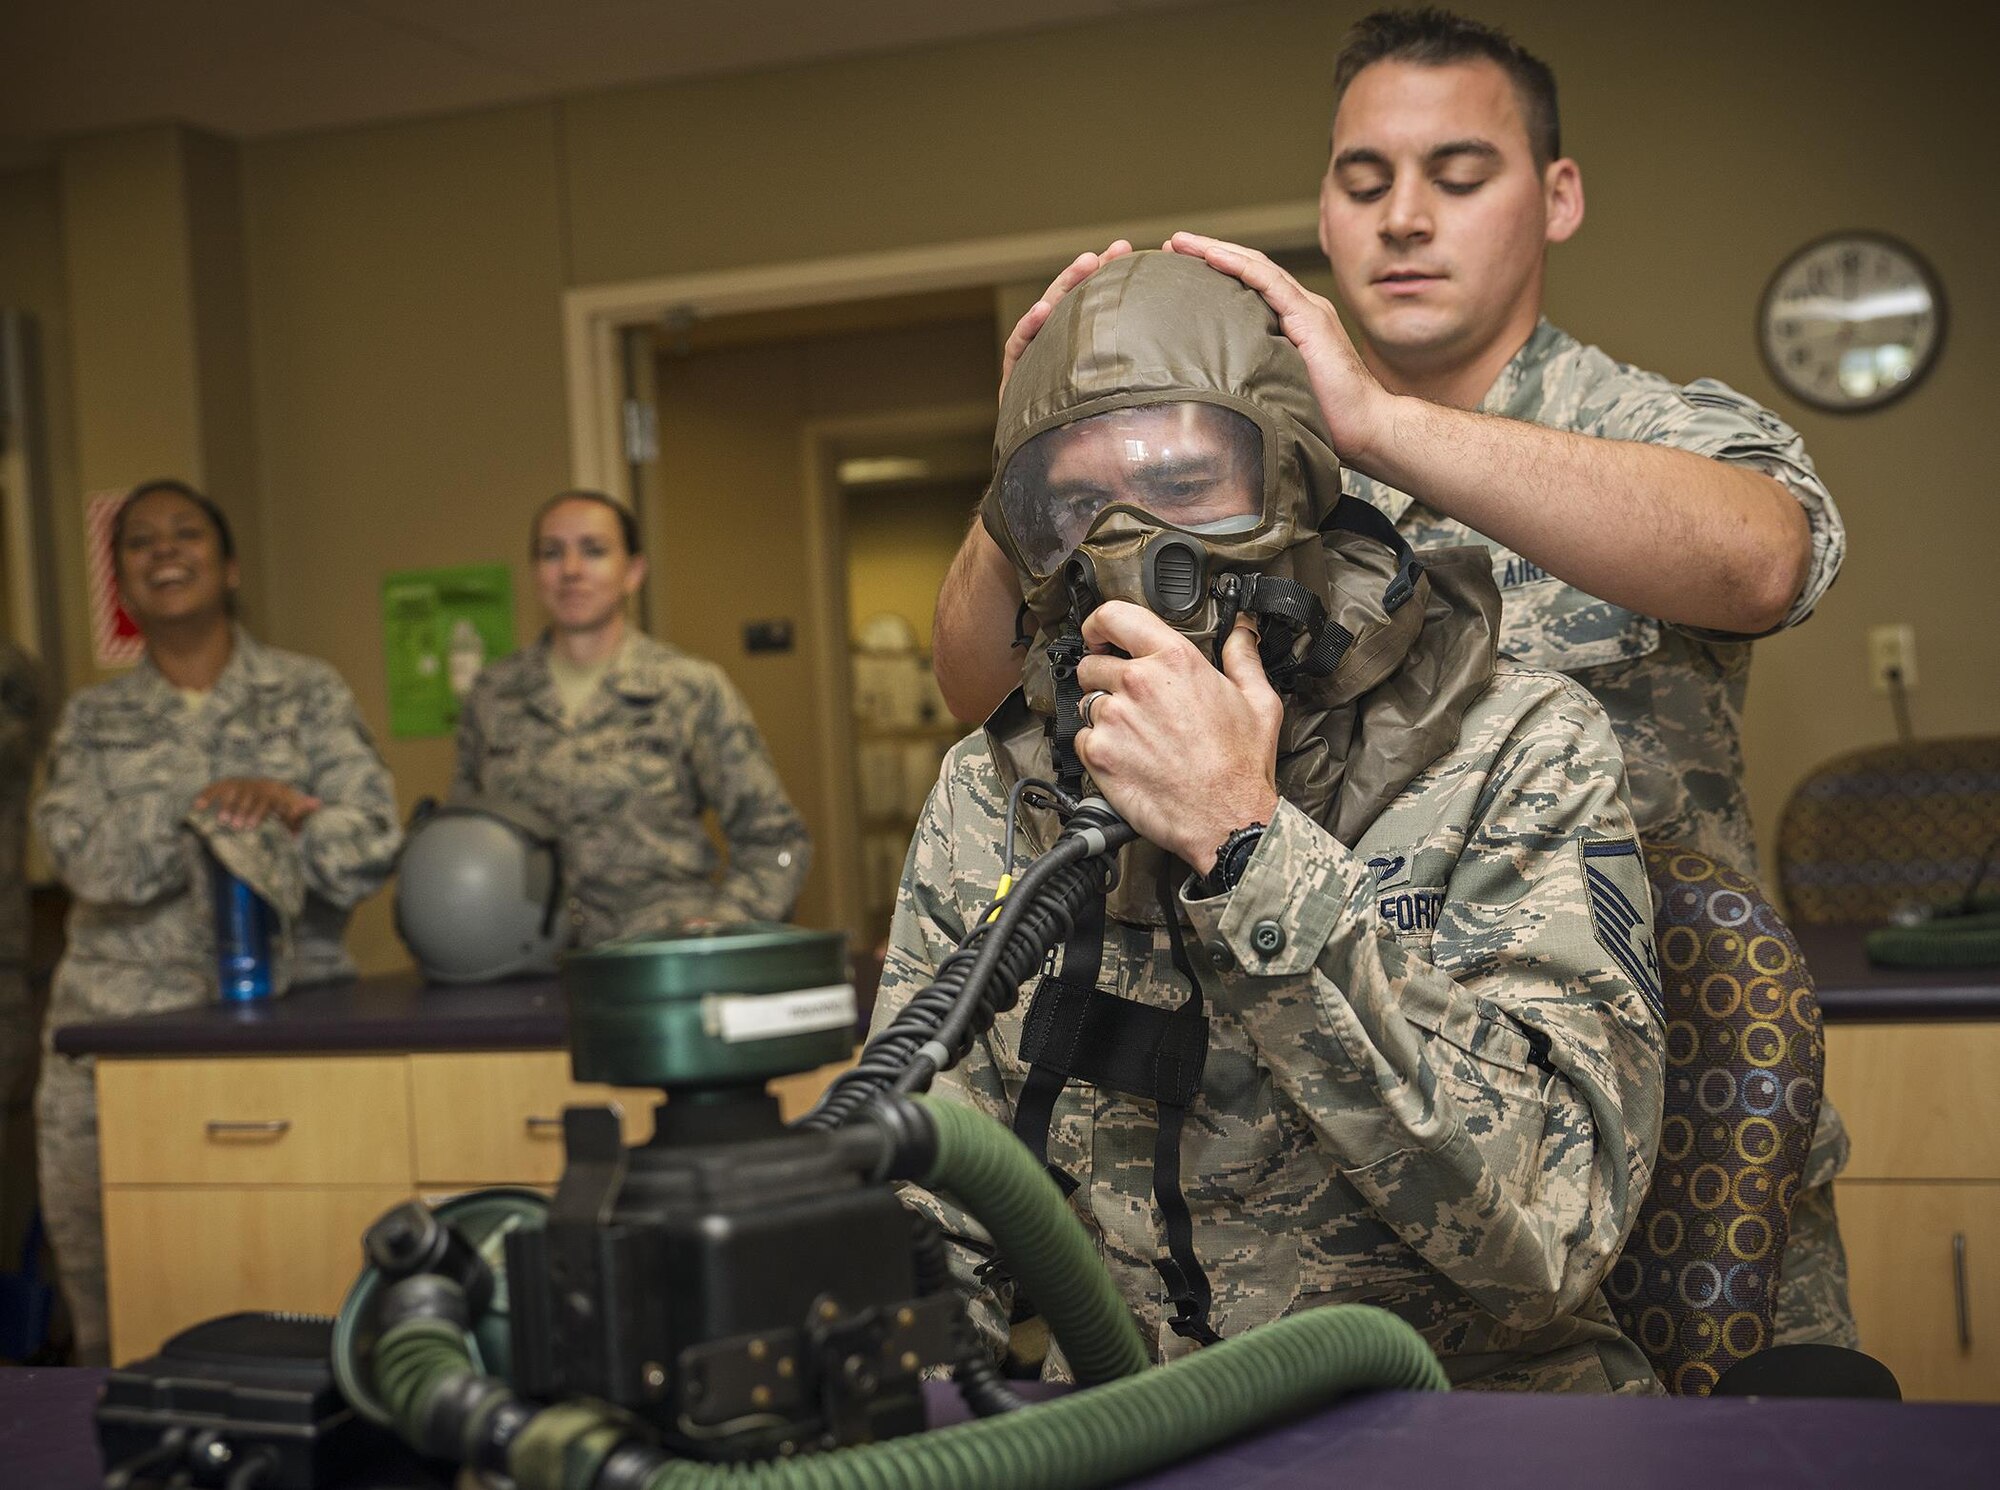 Senior Airman Derrick Eldridge, 433rd Operations Support Squadron aircrew flight attendant technician, secures the aircrew eye respiratory protection system on Master Sgt. Jaron Wagner, 359th Aerospace Medicine Squadron aerospace and operational physiology training flight chief, Sept. 29, 2016 at Joint Base San Antonio-Lackland, Texas. The Airmen received a Survival Evasion Resistance and Escape briefing followed by a tour of a C-5M Super Galaxy aircraft. They were also given an aircrew flight equipment demonstration at the 433rd OSS.  (U.S. Air Force photo by Benjamin Faske)